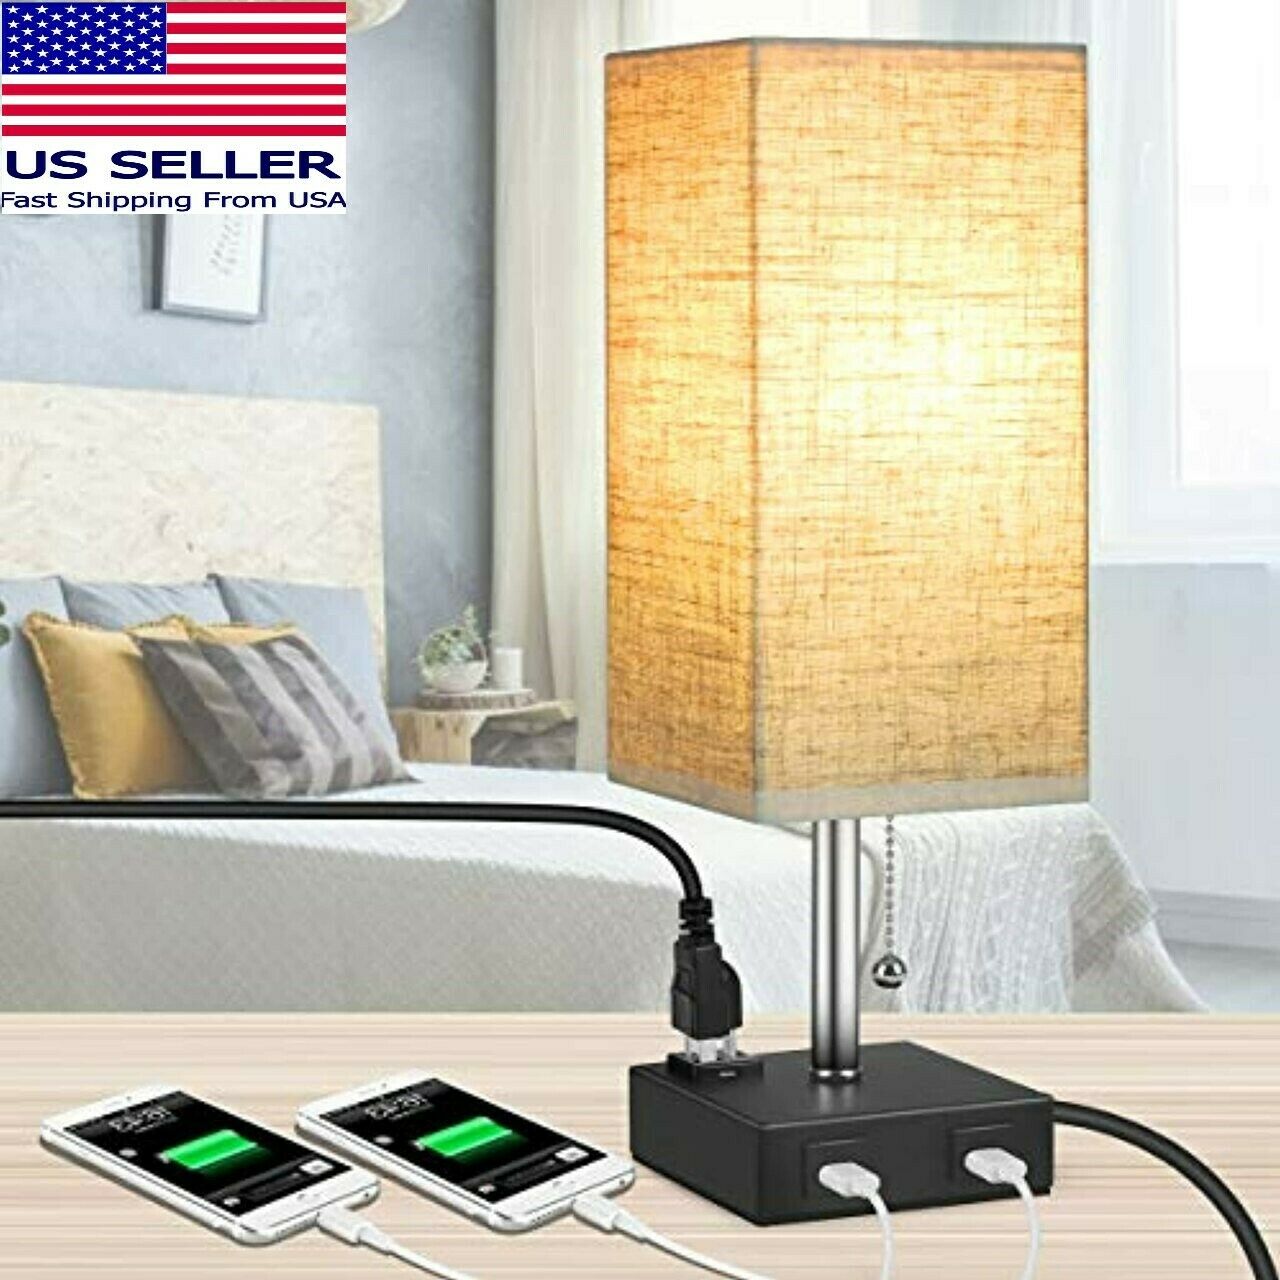 Moico Bedside Modern Table Nightstand Lamp W/ 2 Usb Charging Ports & 1 Ac Outlet